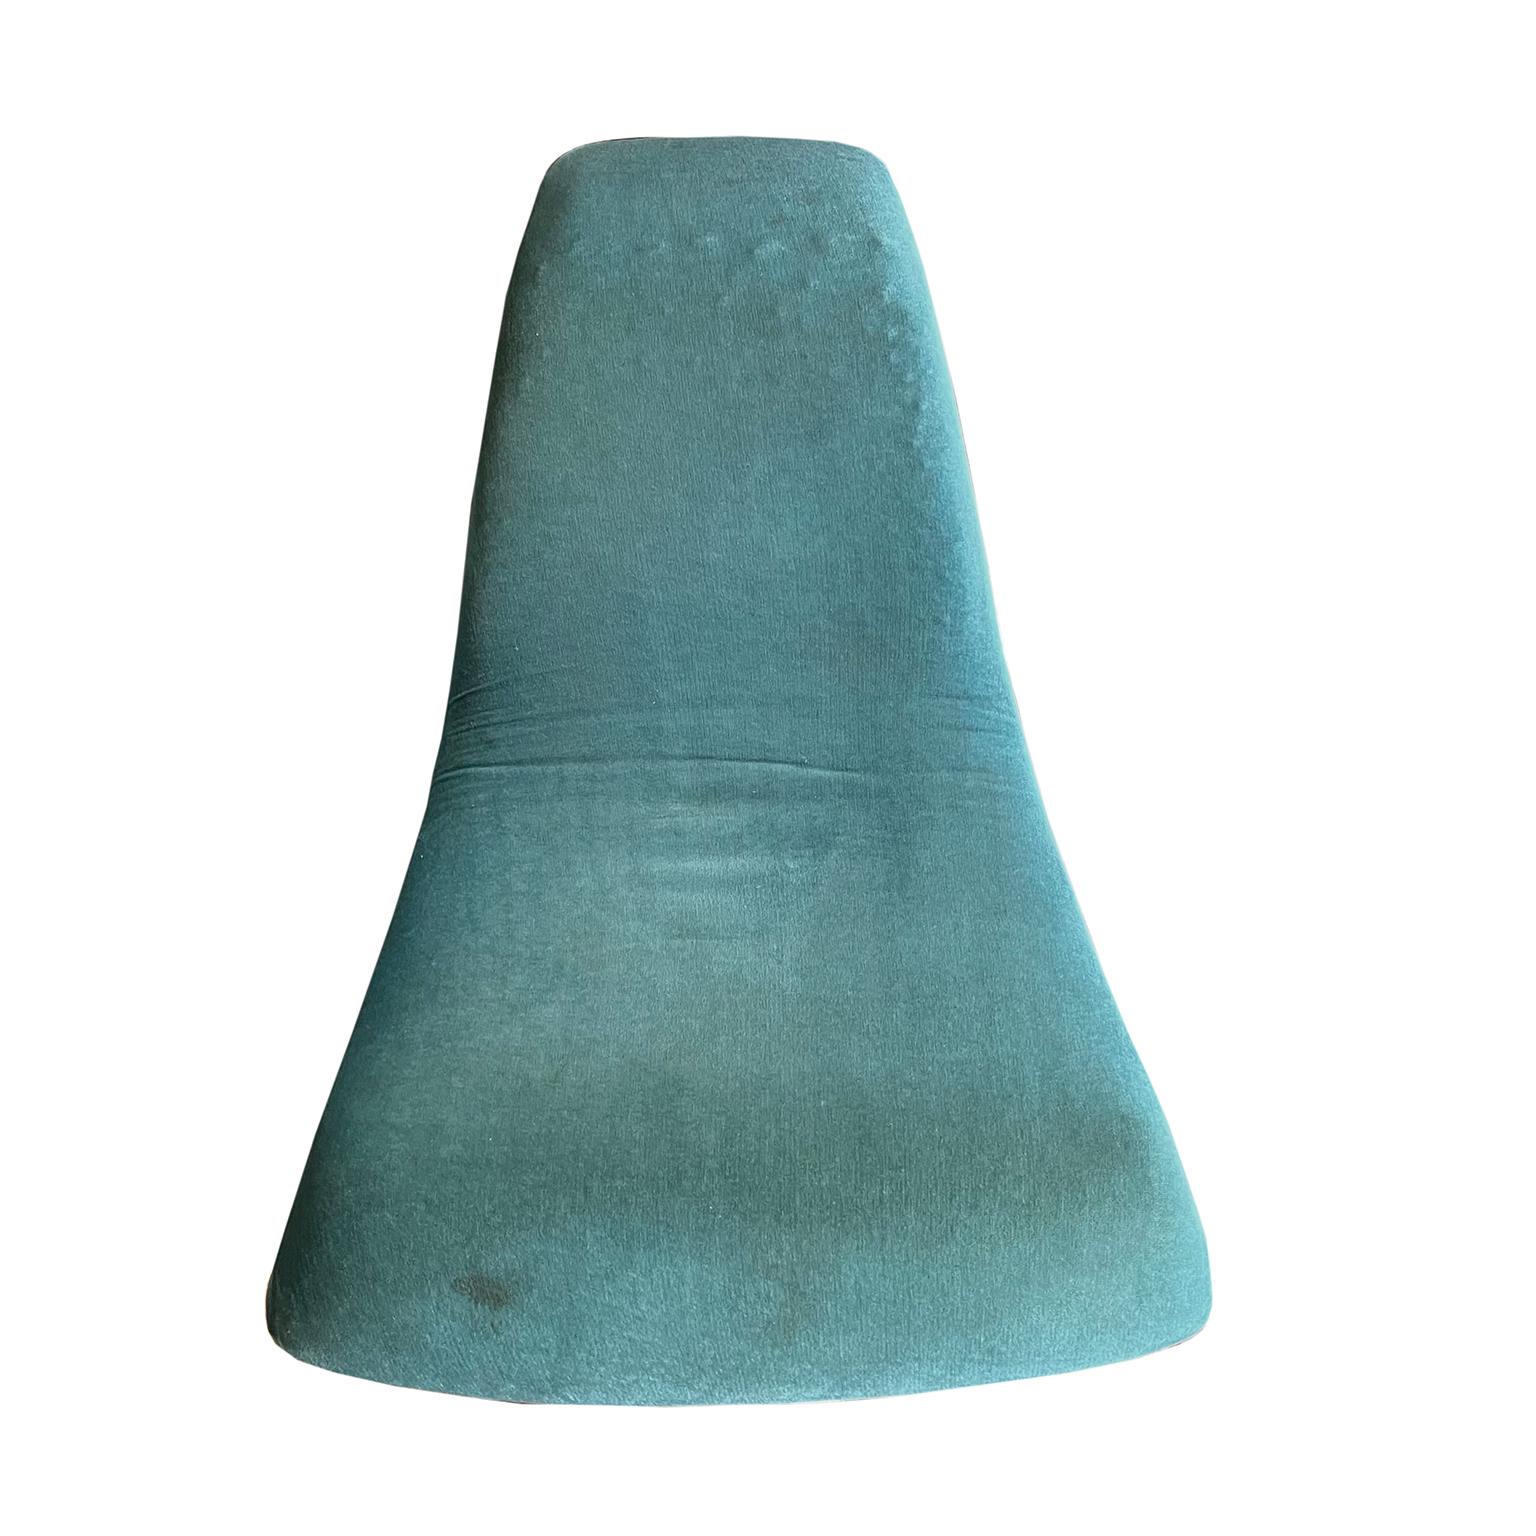 Fabric 1969, Burkhardt Vogtherr for Rosenthal Studio-Linie, Turquoise Modulares Sofa For Sale